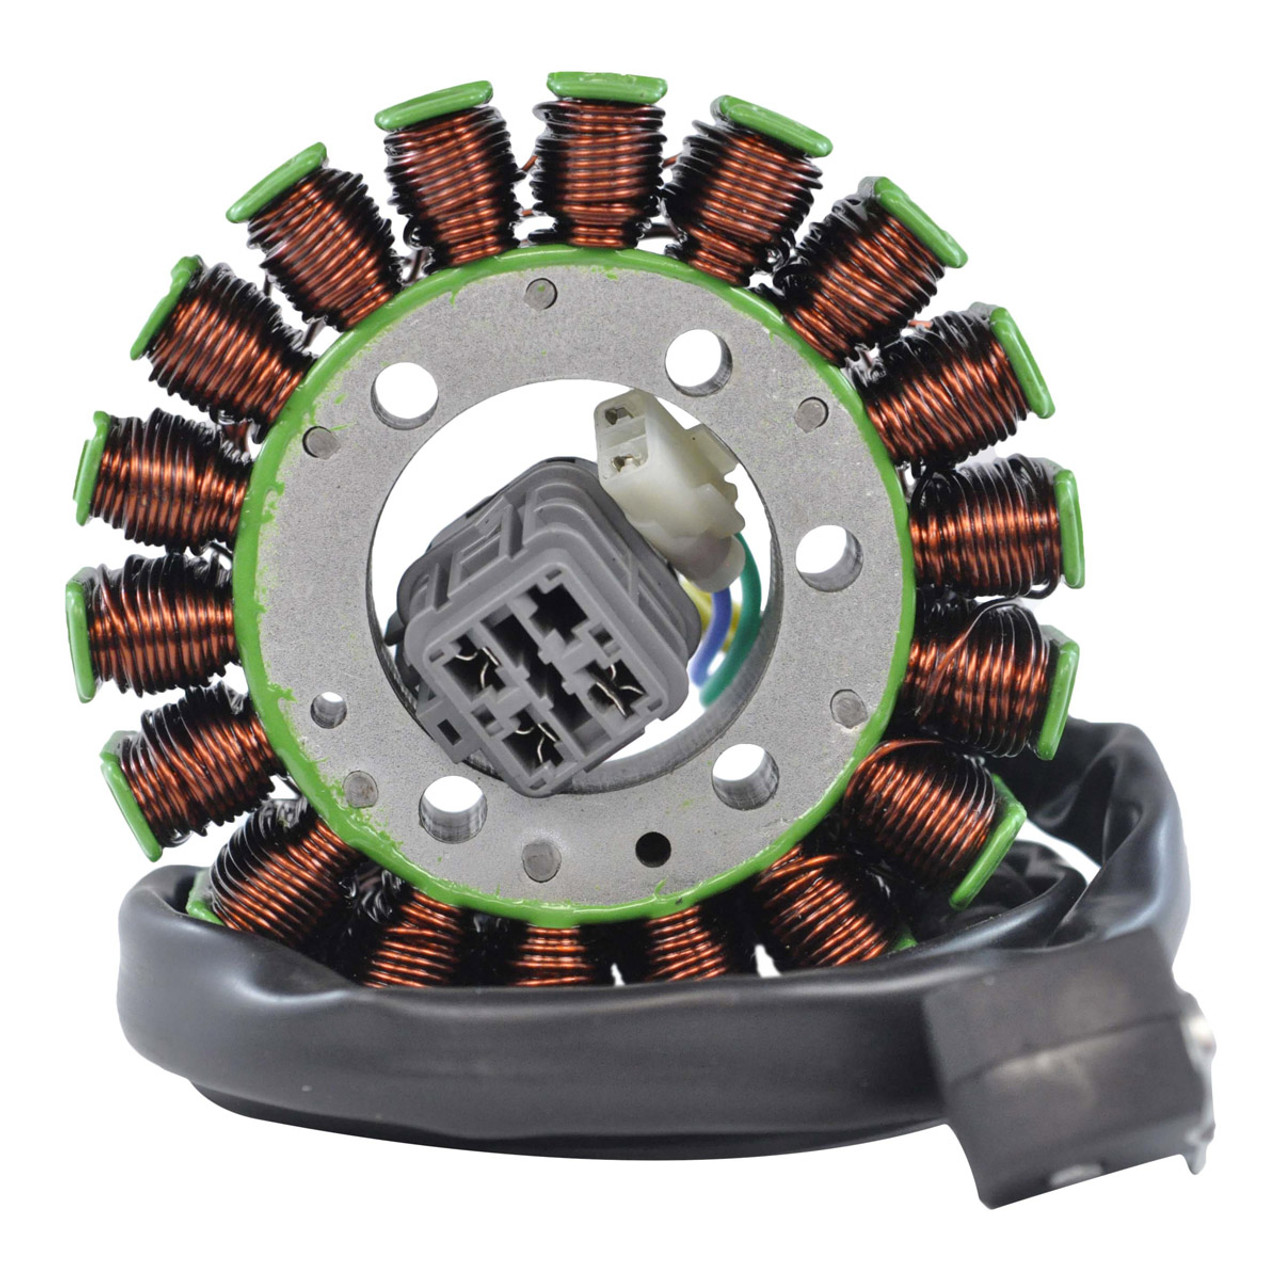 RMSTATOR New Aftermarket Can-am Stator, RM01286